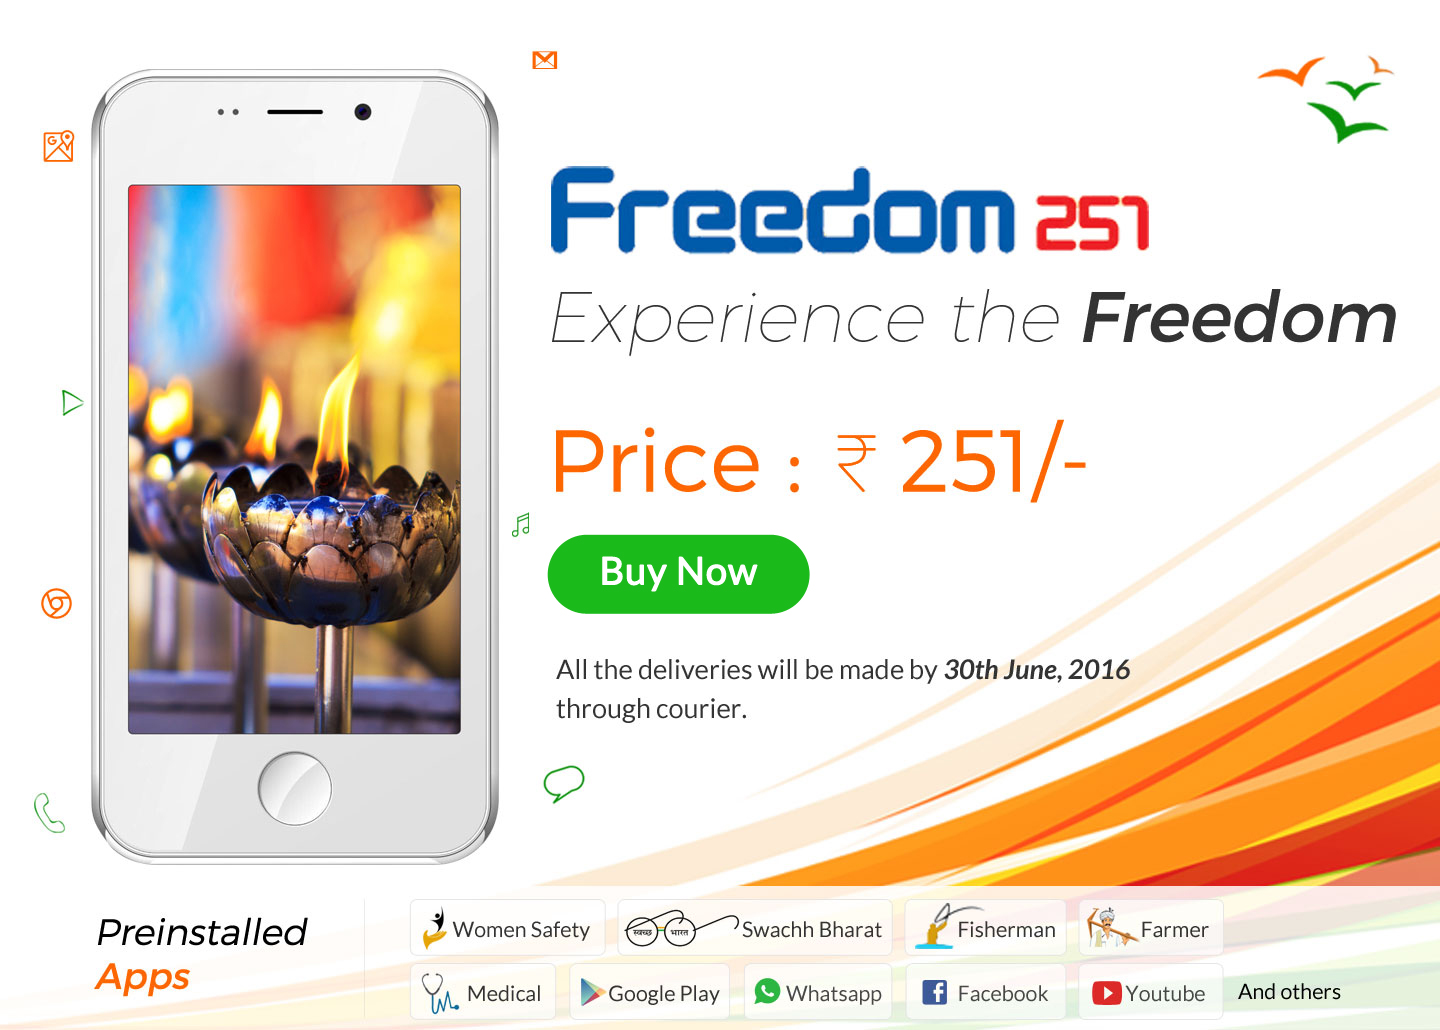 freedom 251 review